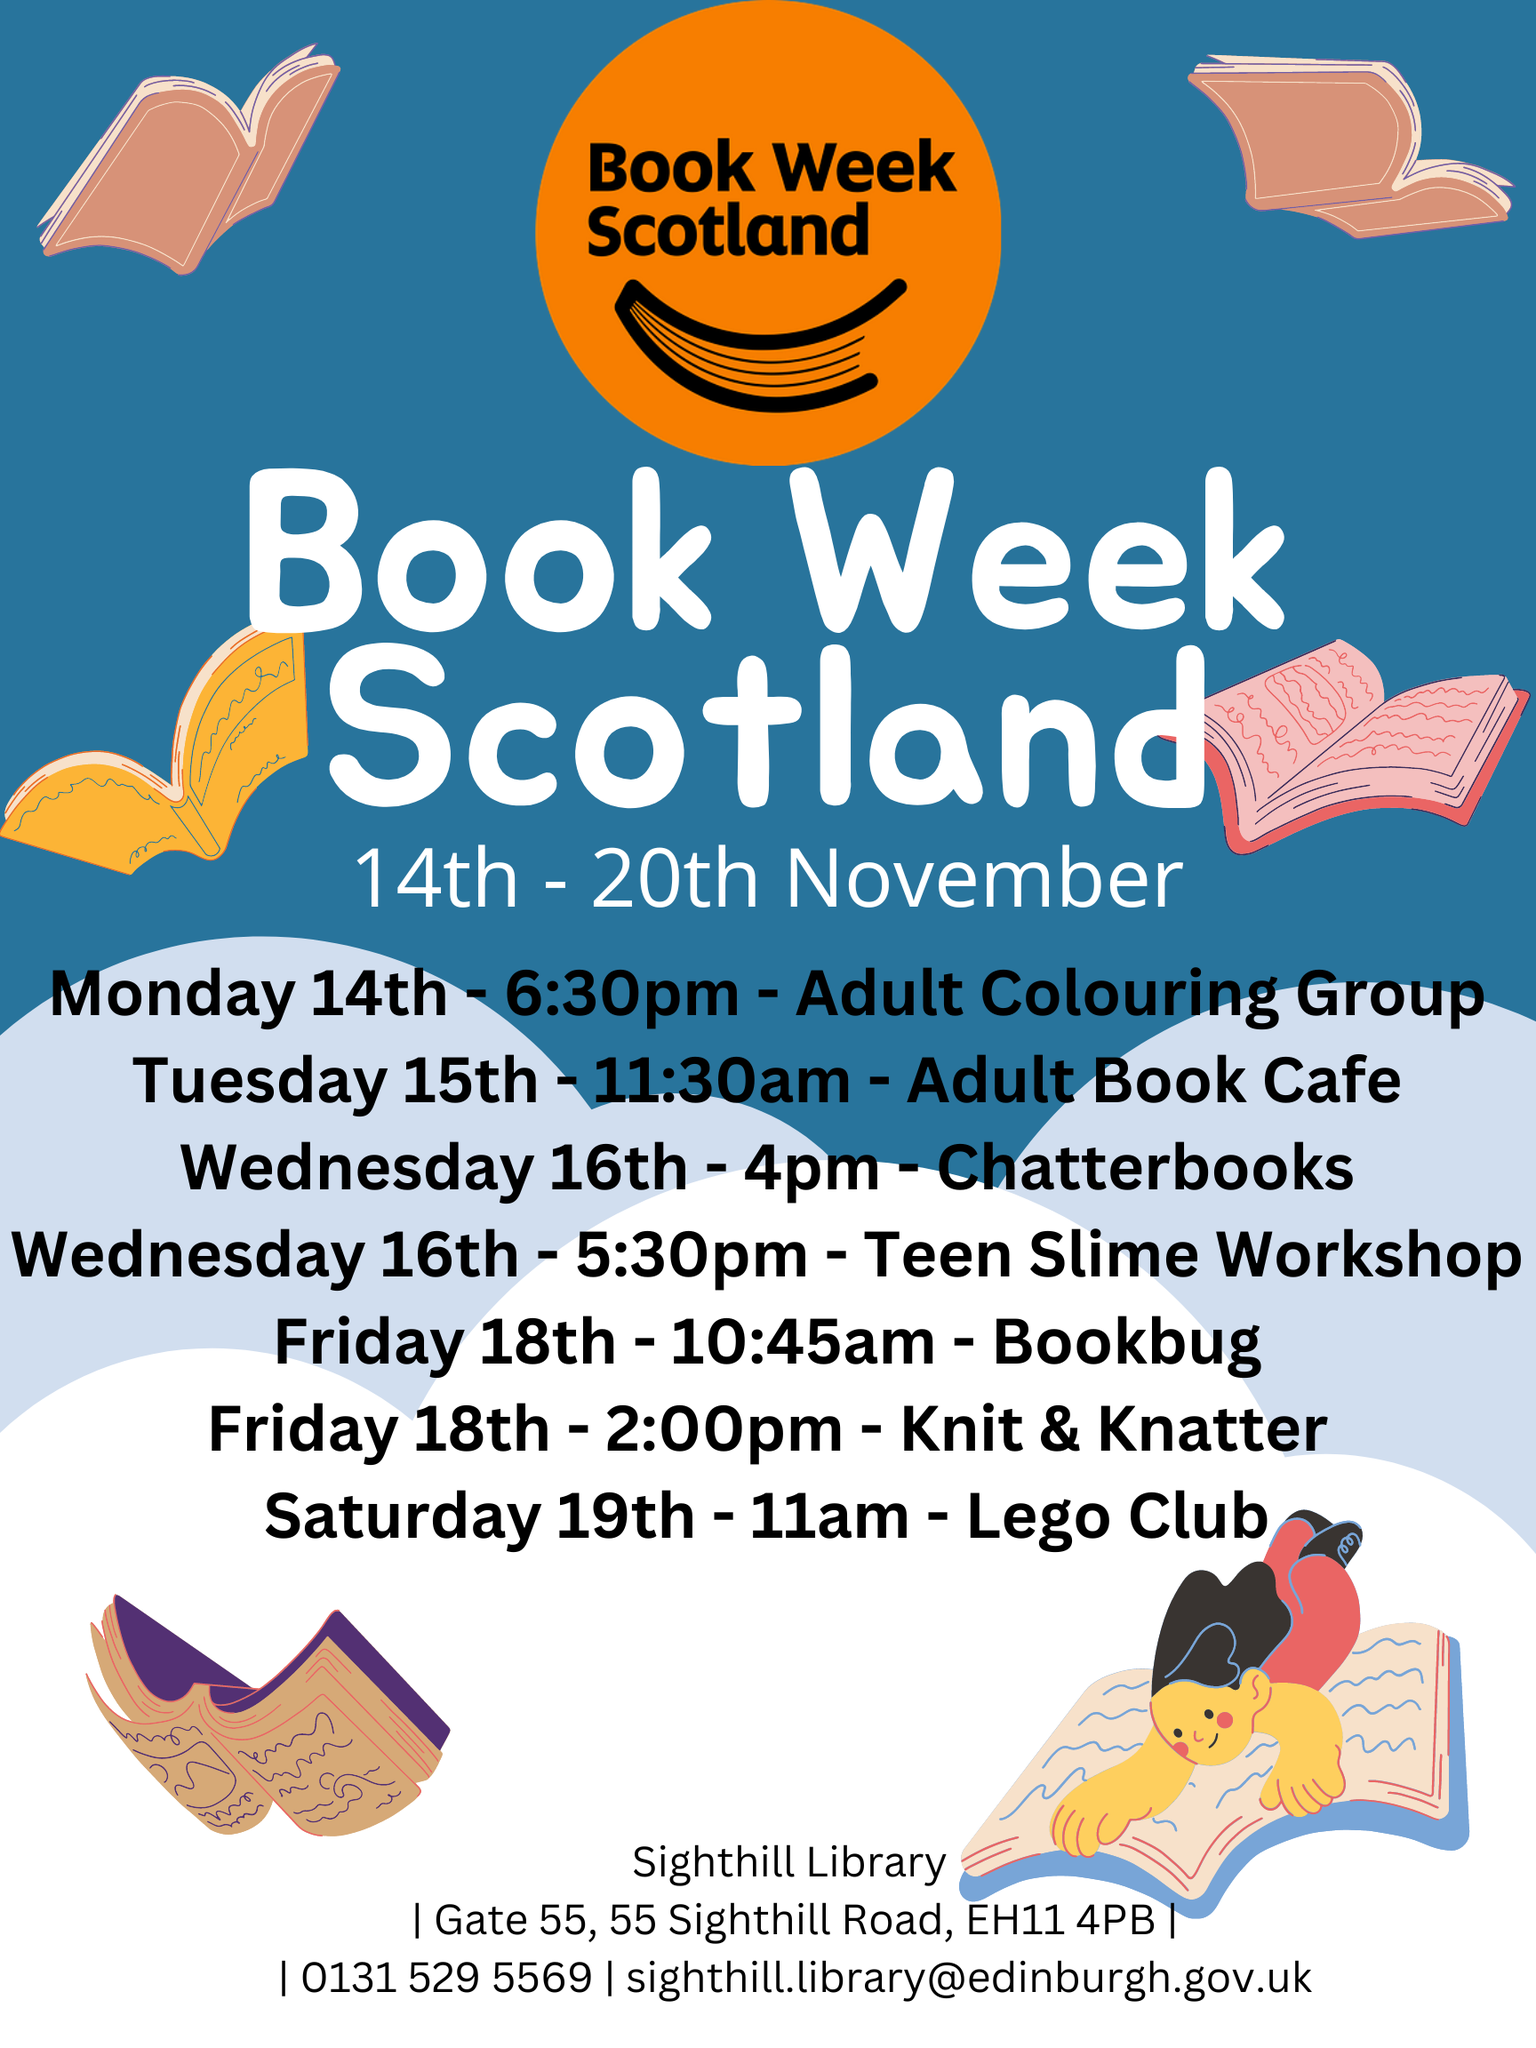 Book-Week-SCotland-Sighthill-Library-Featured_Image